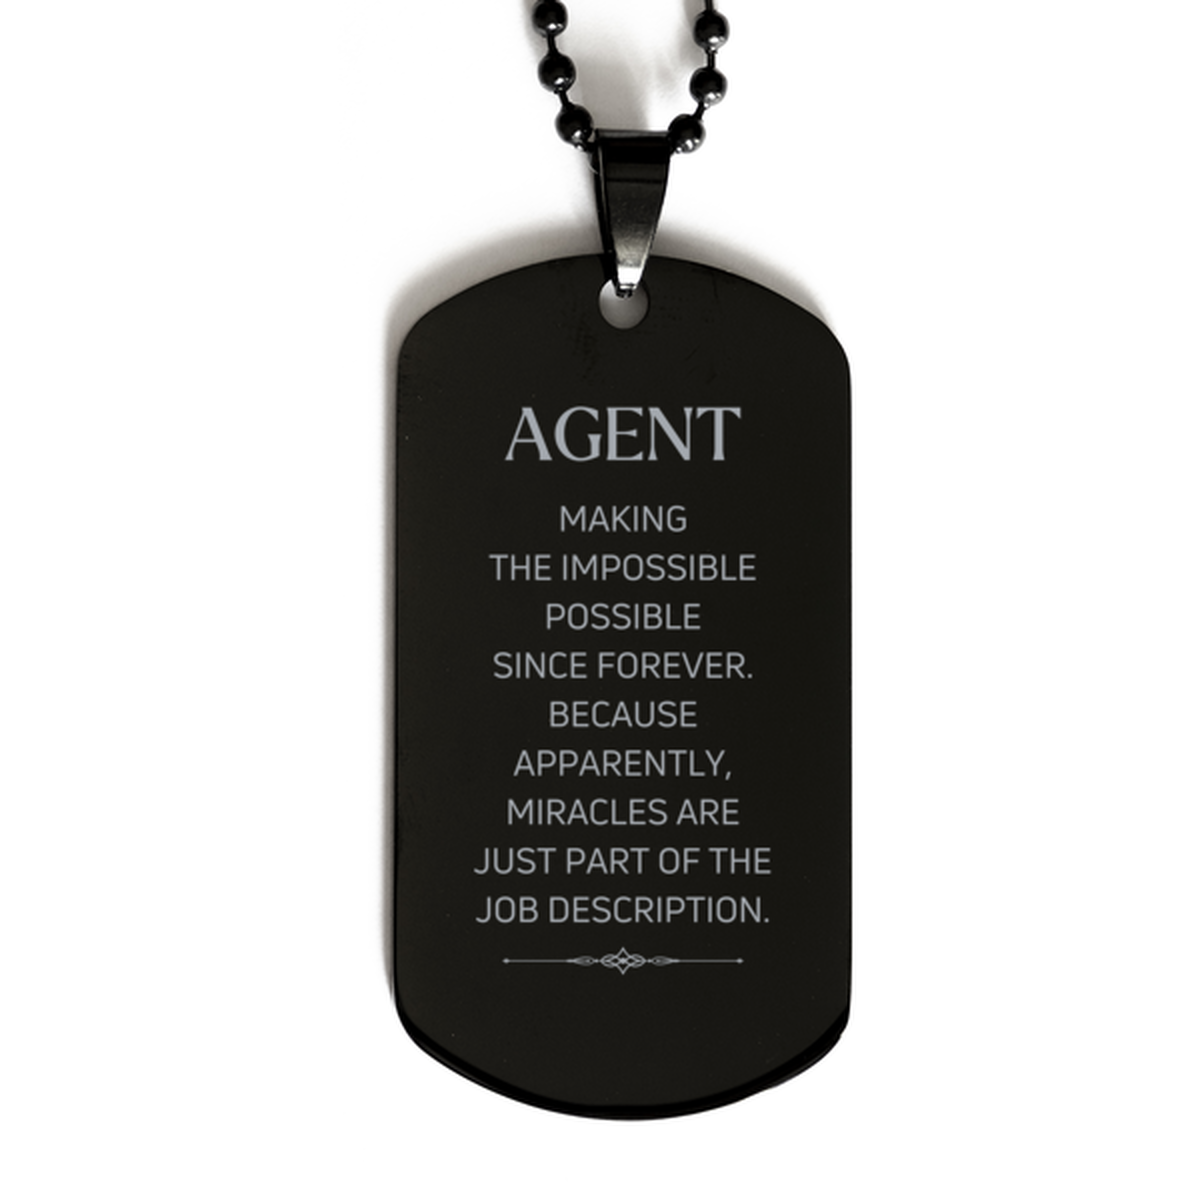 Funny Agent Gifts, Miracles are just part of the job description, Inspirational Birthday Black Dog Tag For Agent, Men, Women, Coworkers, Friends, Boss